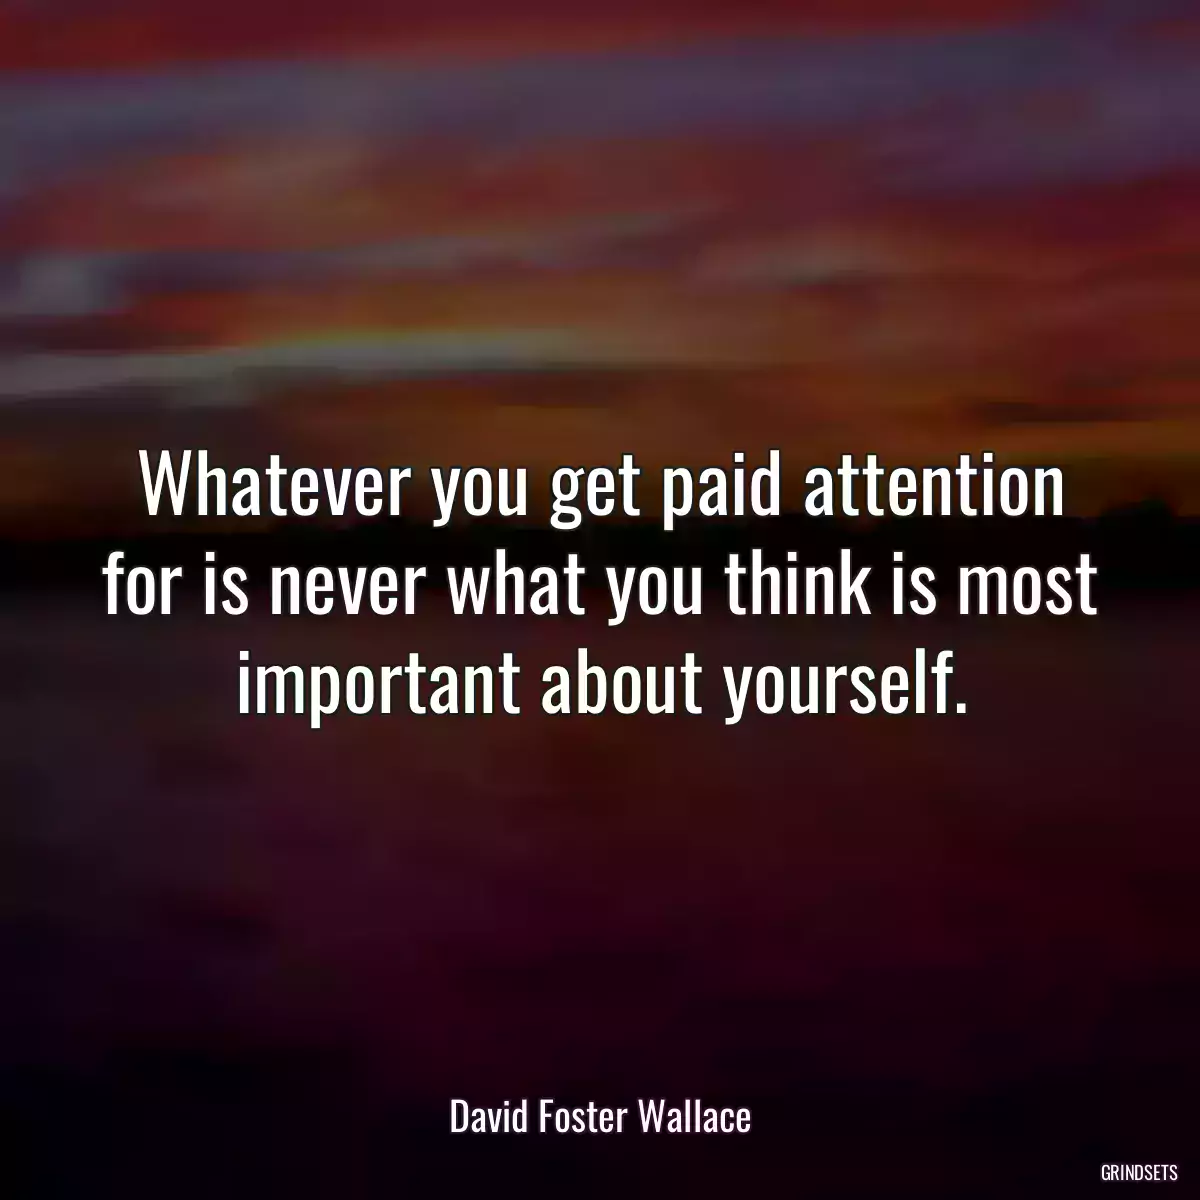 Whatever you get paid attention for is never what you think is most important about yourself.